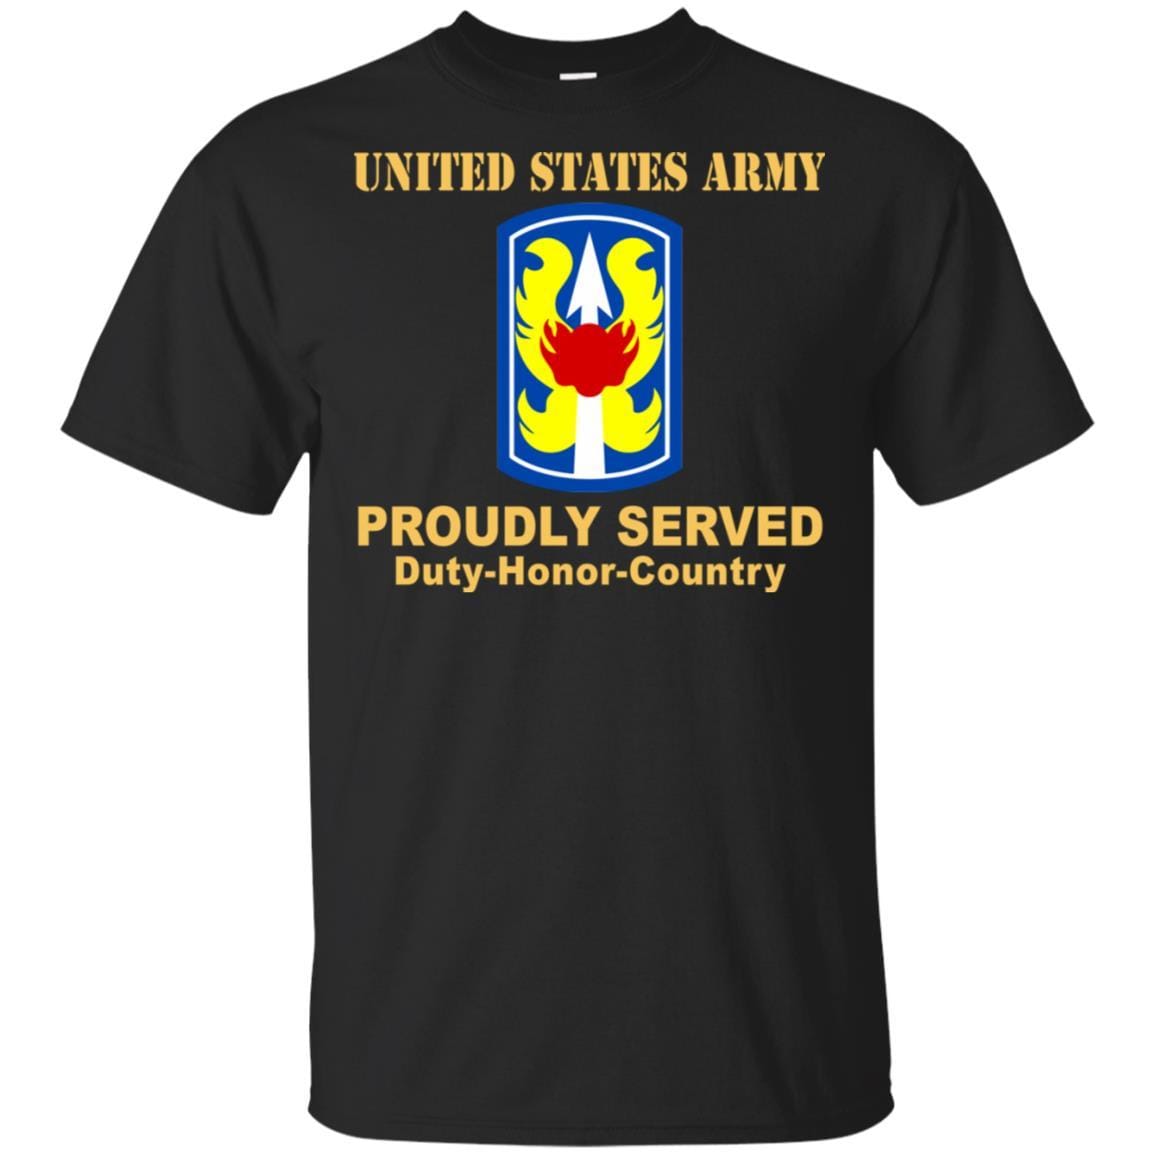 US ARMY 199TH INFANTRY BRIGADE - Proudly Served T-Shirt On Front For Men-TShirt-Army-Veterans Nation